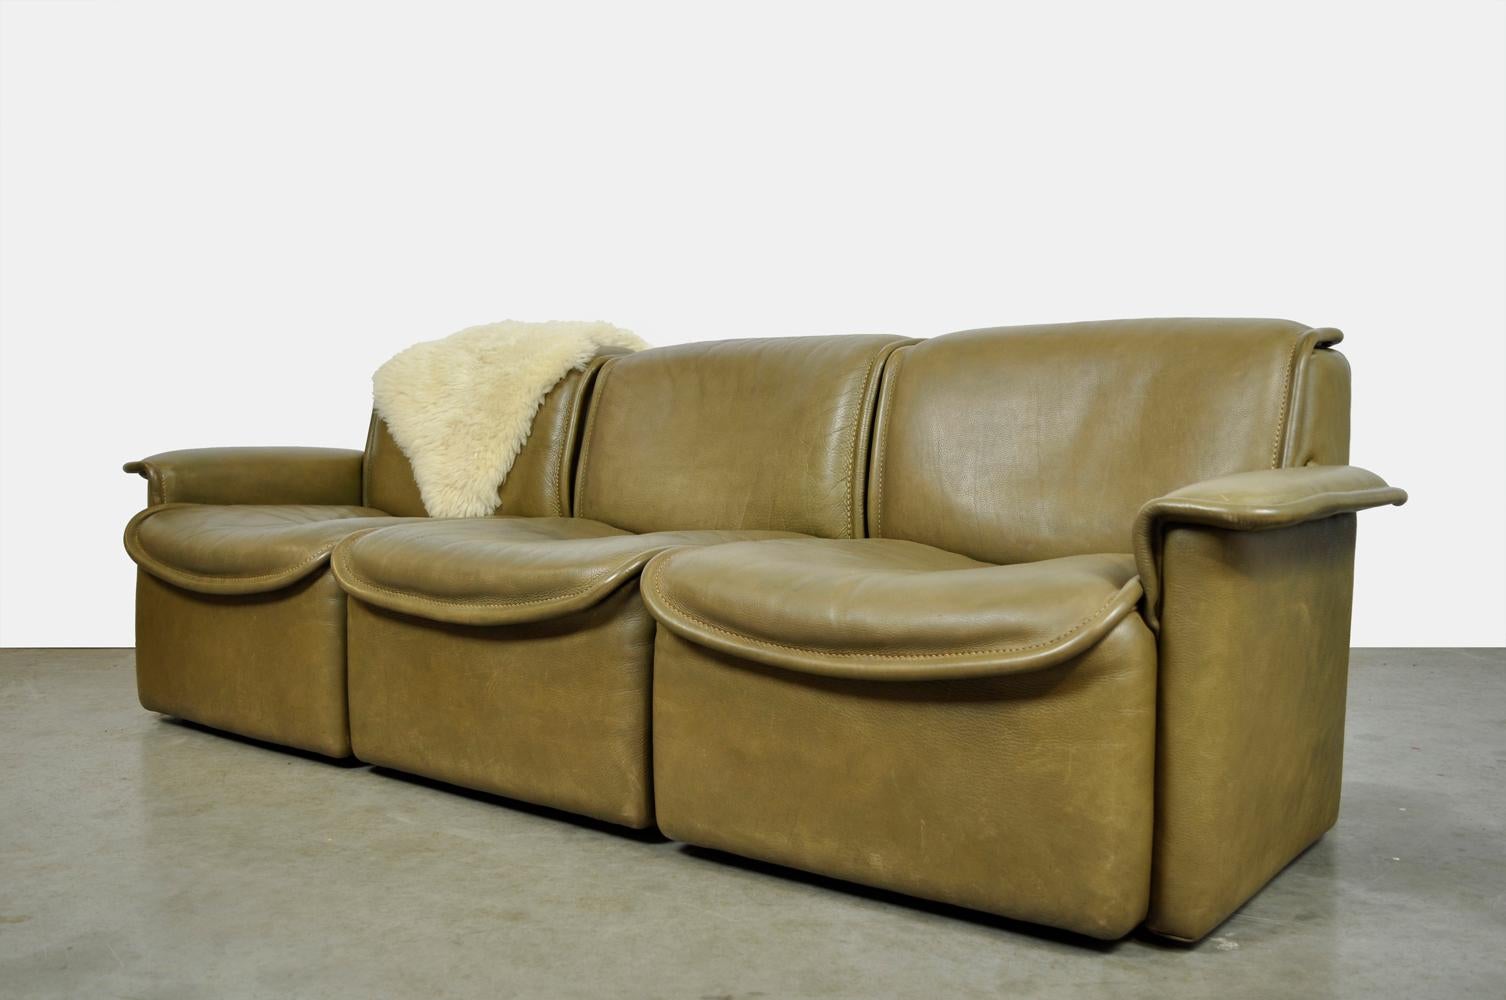 Swiss Olive Colored Leather 3-Seater Sofa, Model Ds-12 by De Sede, 1970s Switzerland For Sale